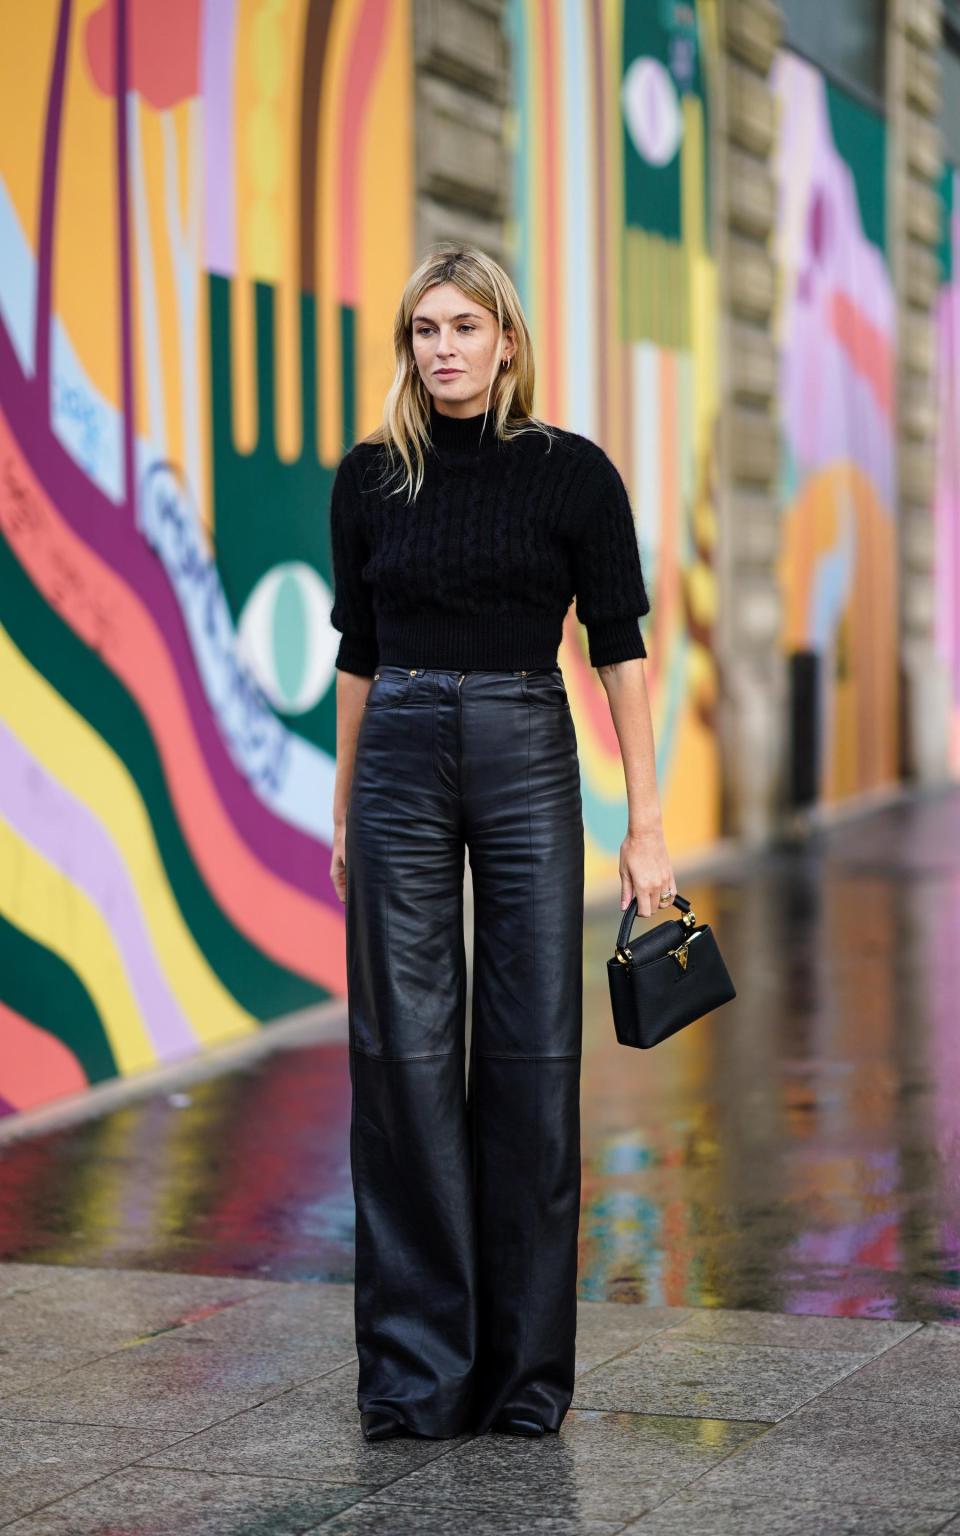 Camille Charriere in black leather trousers - Getty Images